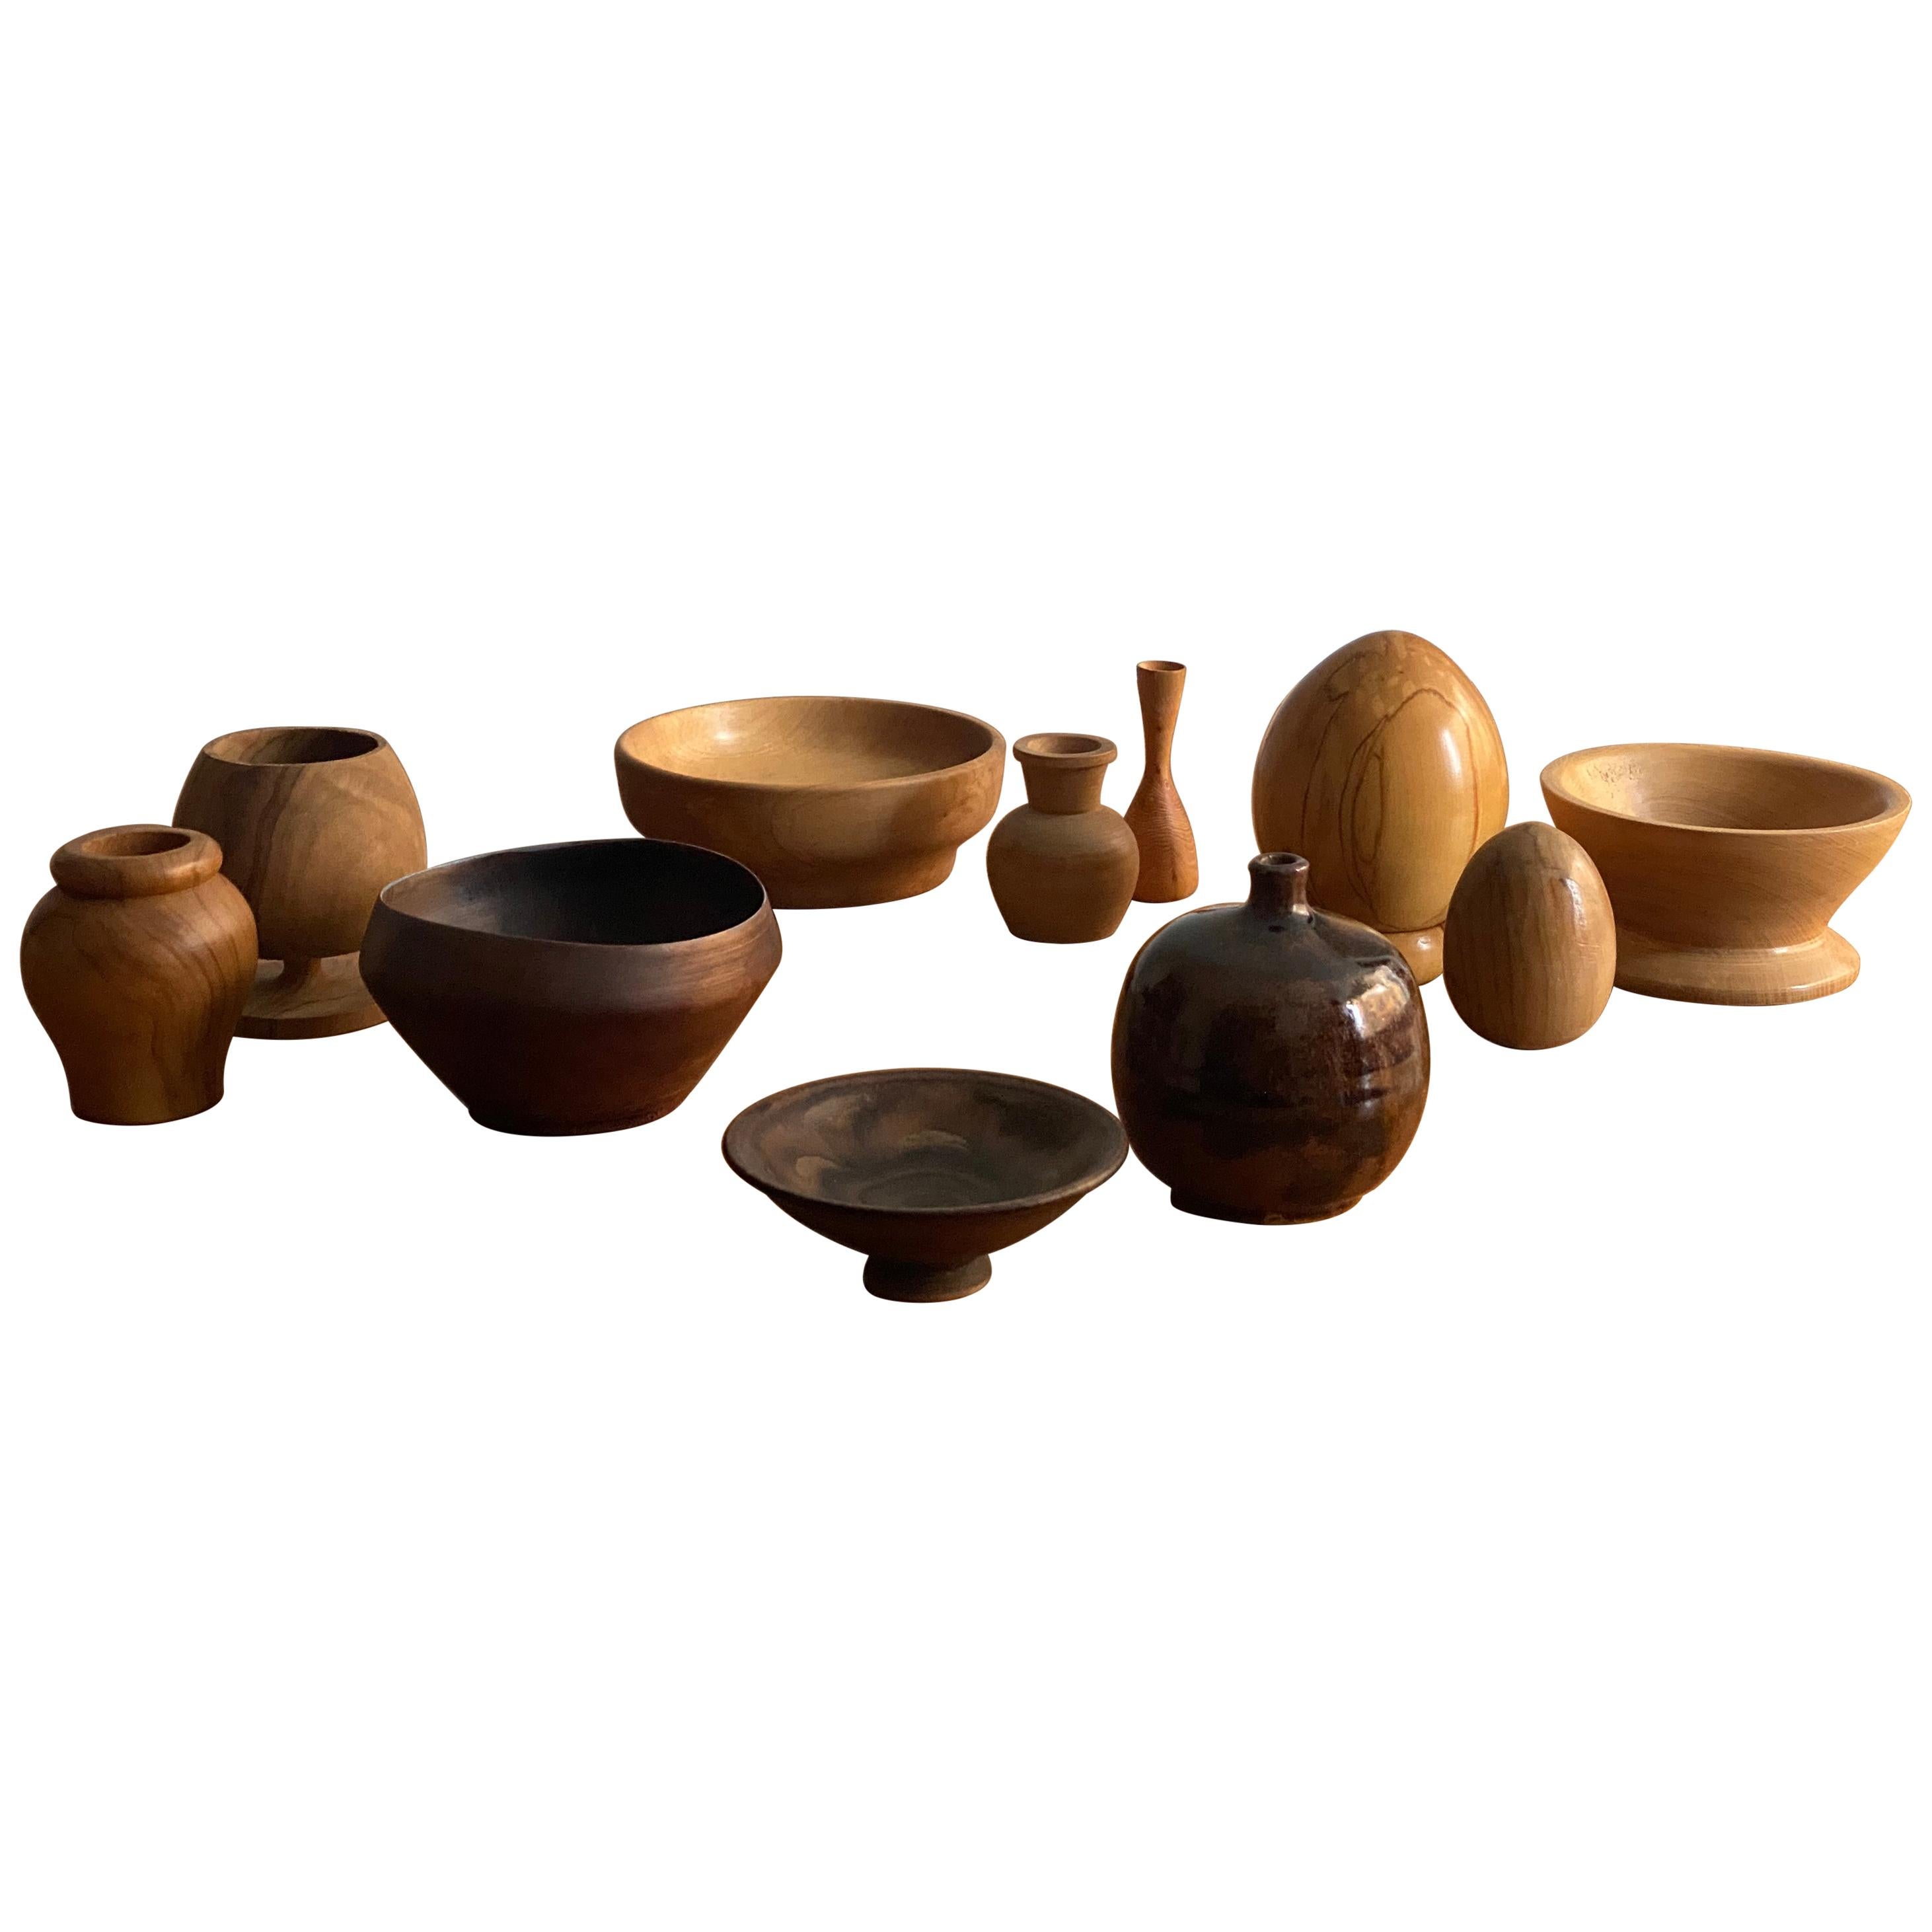 Swedish Craft, Assorted Collection of Bowls, Wood and Ceramics, 20th Century